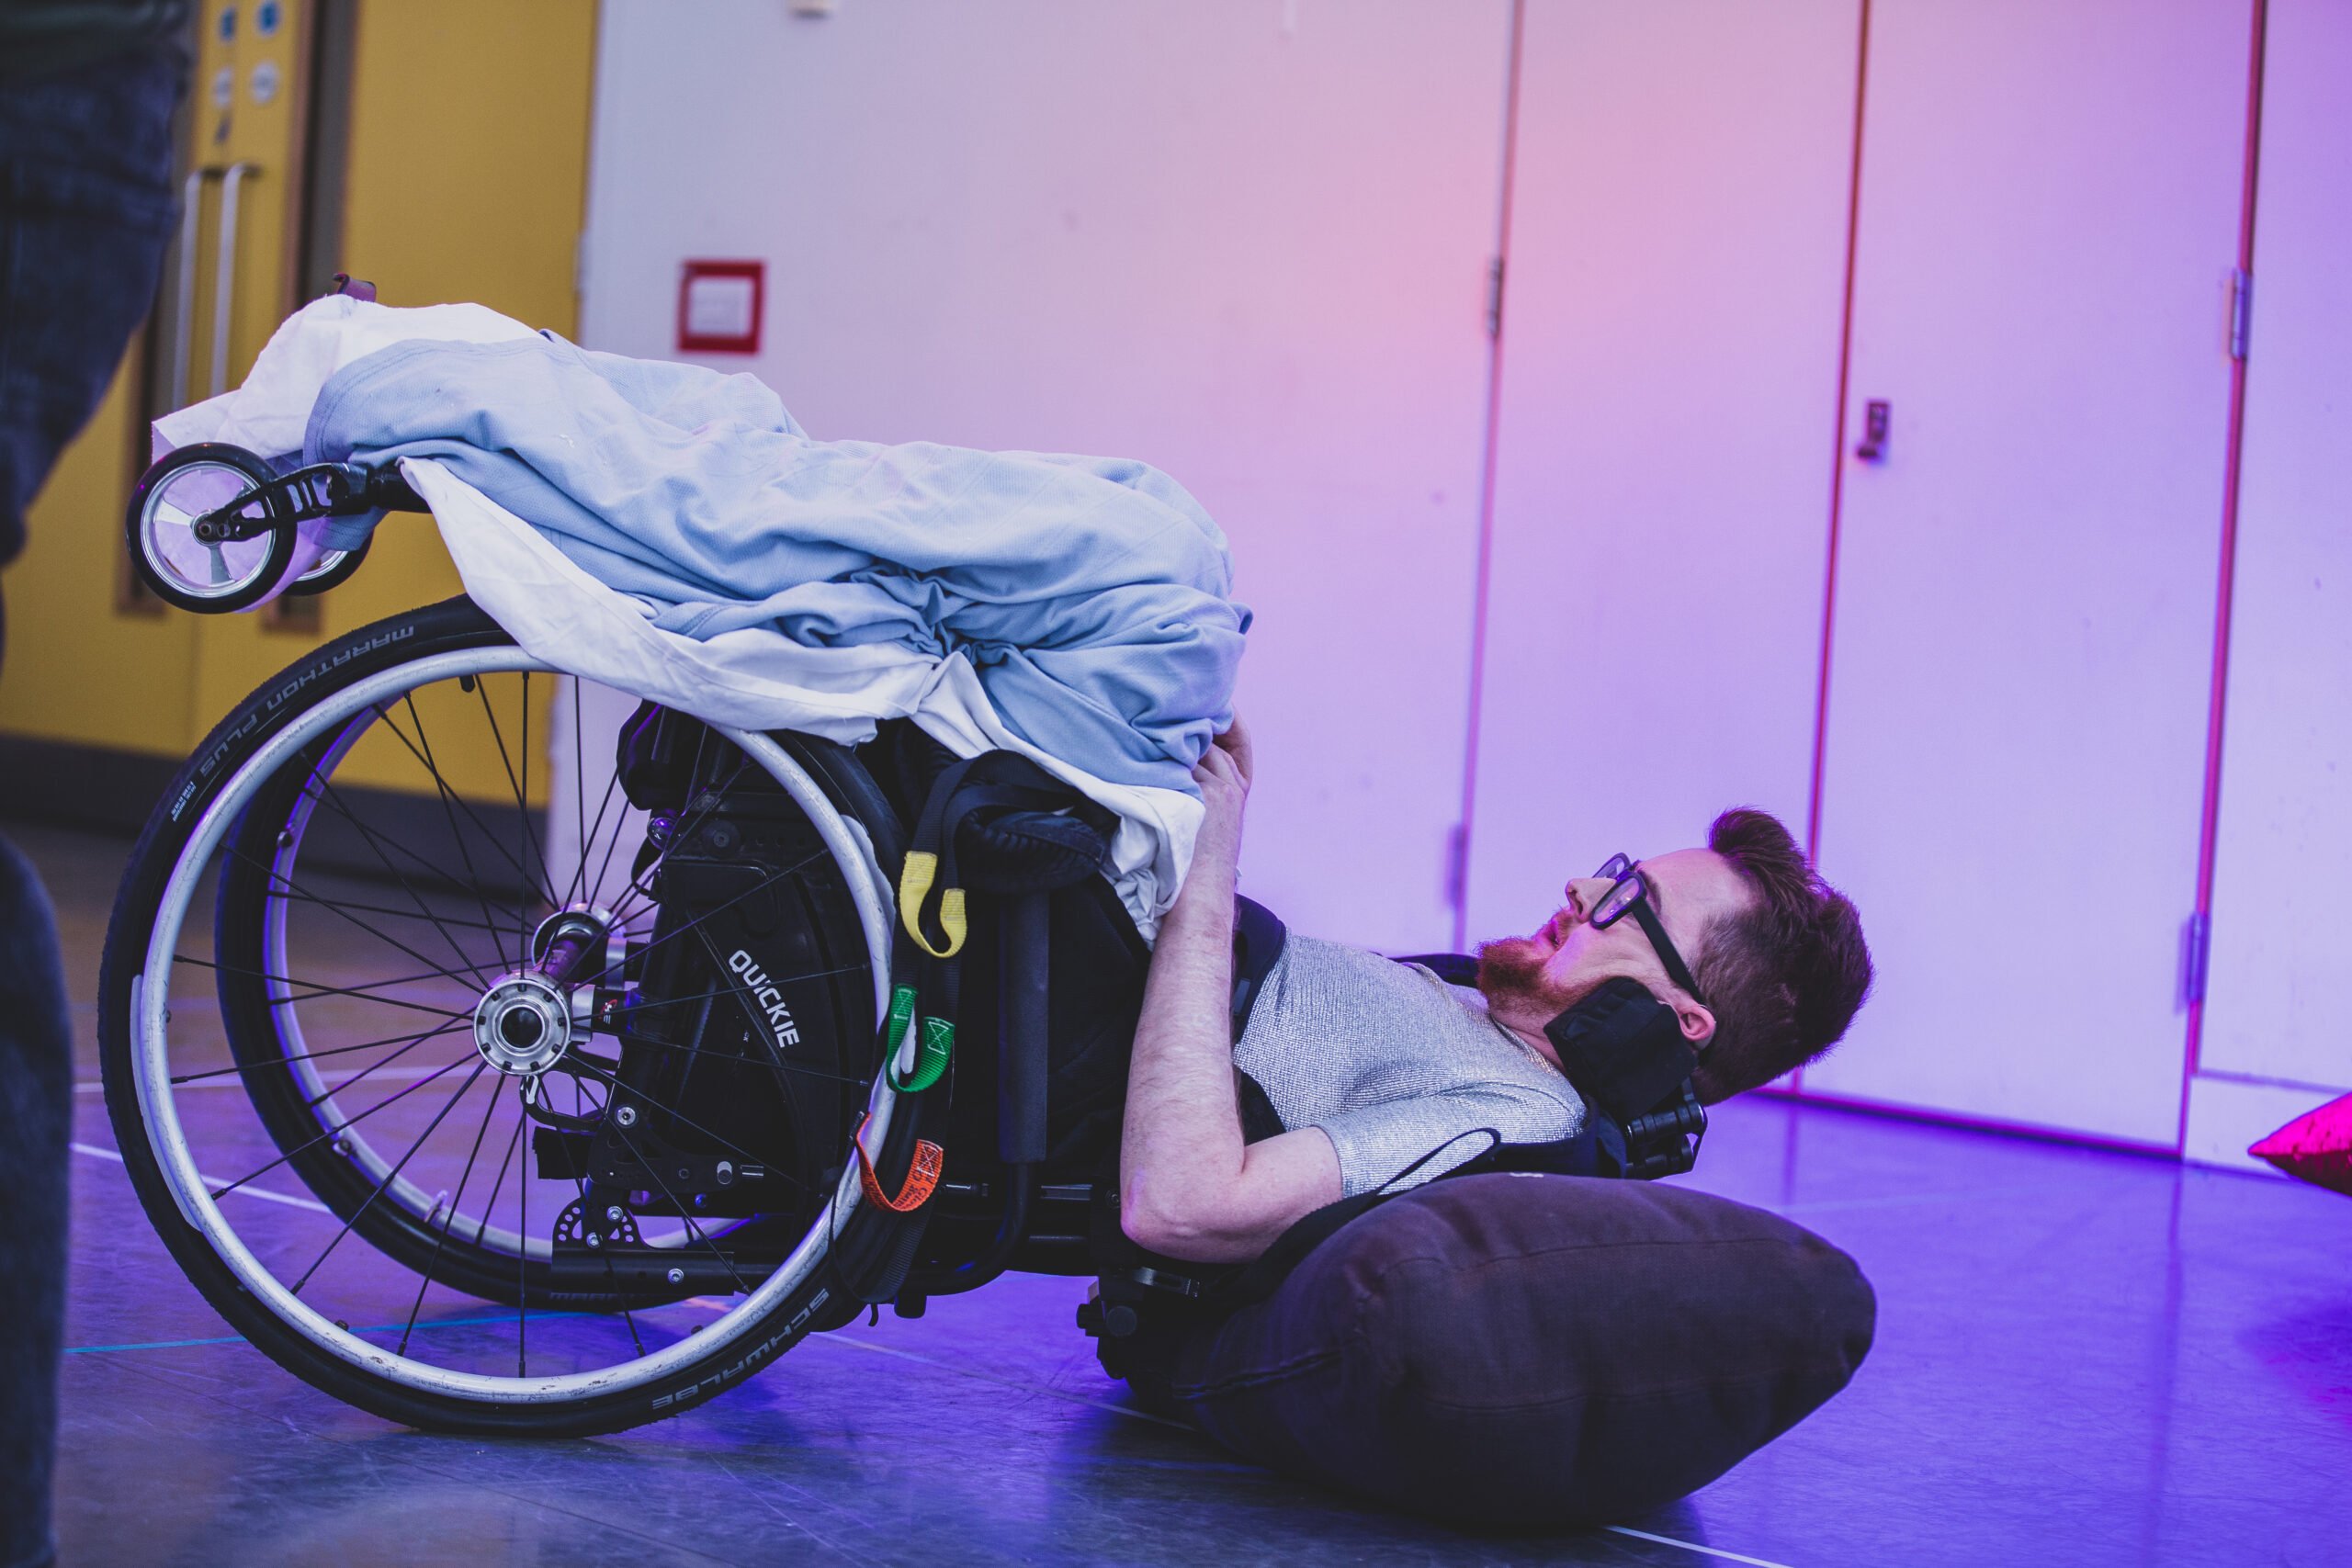 Bathed in purple light, Jamie Hale lies on their back on the floor in a manual wheelchair, a hospital blanket over their legs, to illustrate their workshops and performances